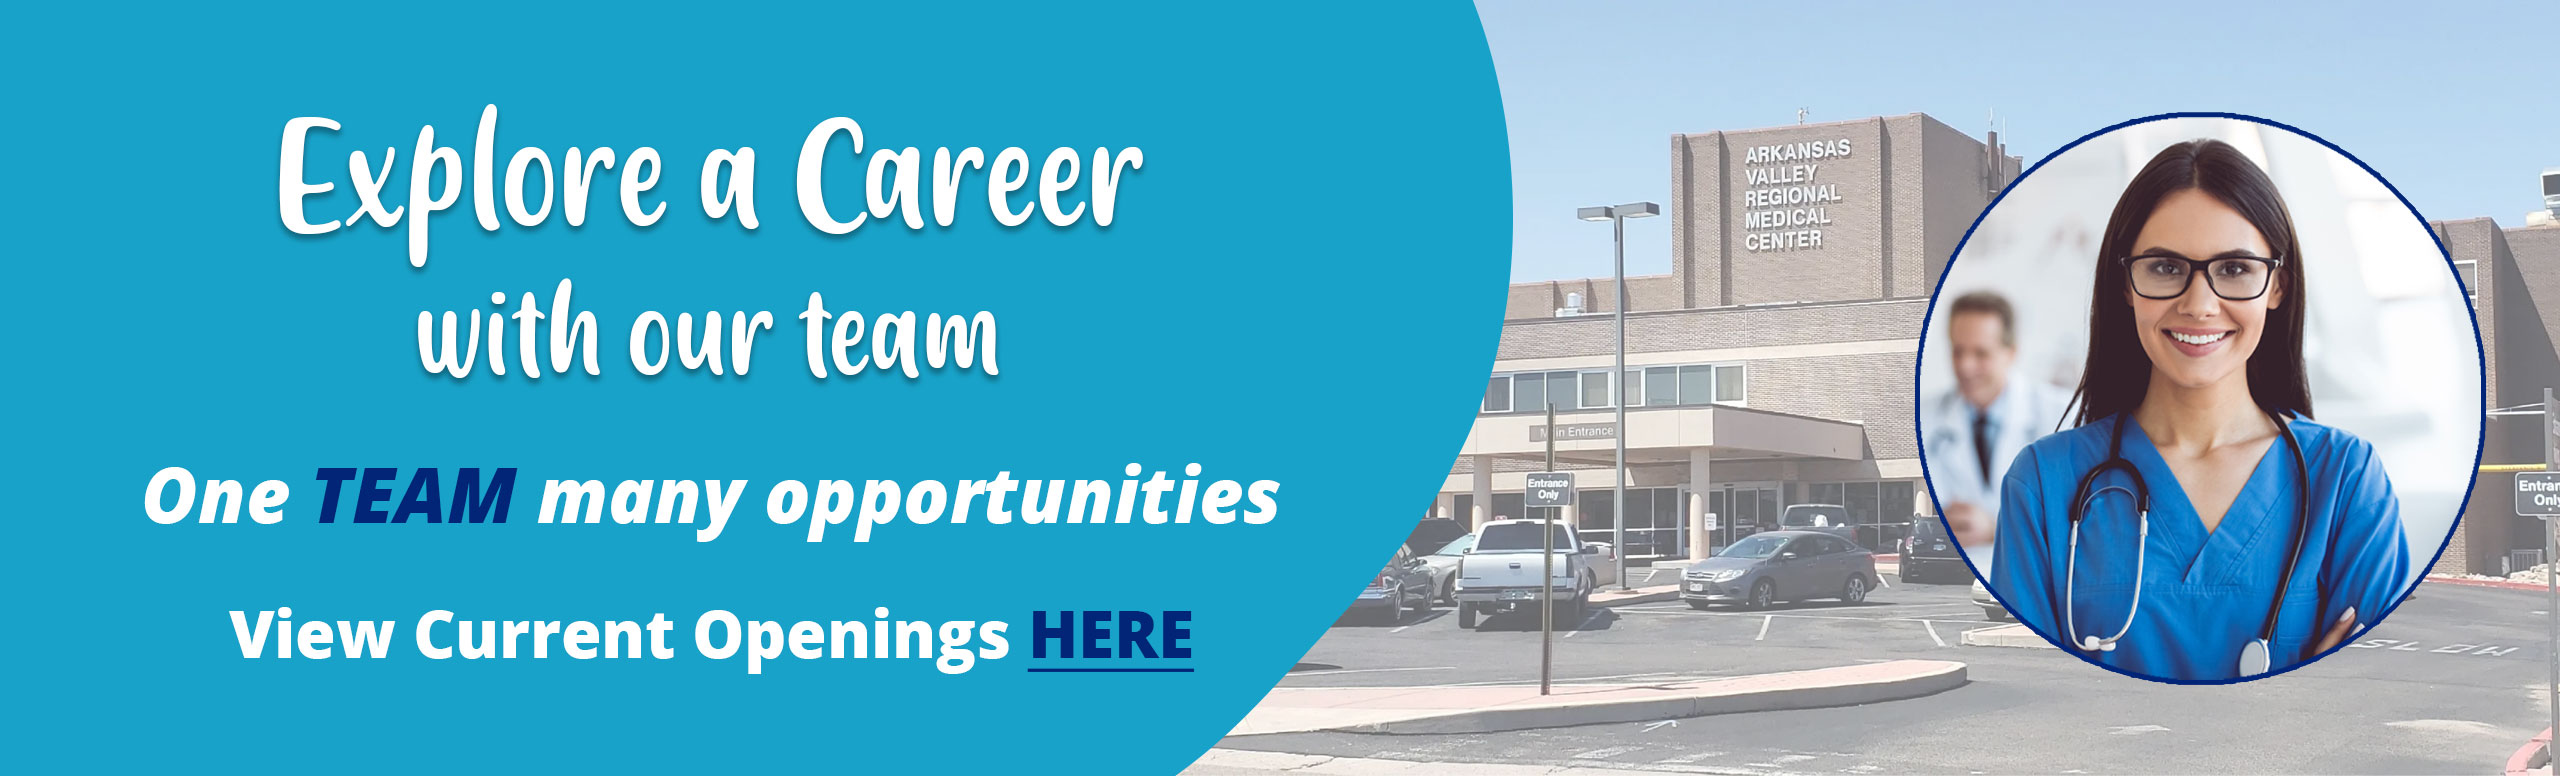 Banner picture of a female Nurse smiling and a background of The Hospital from an outside shot. Banner says:

Explore a Career with our team
One TEAM many opportunities
View Current Openings HERE